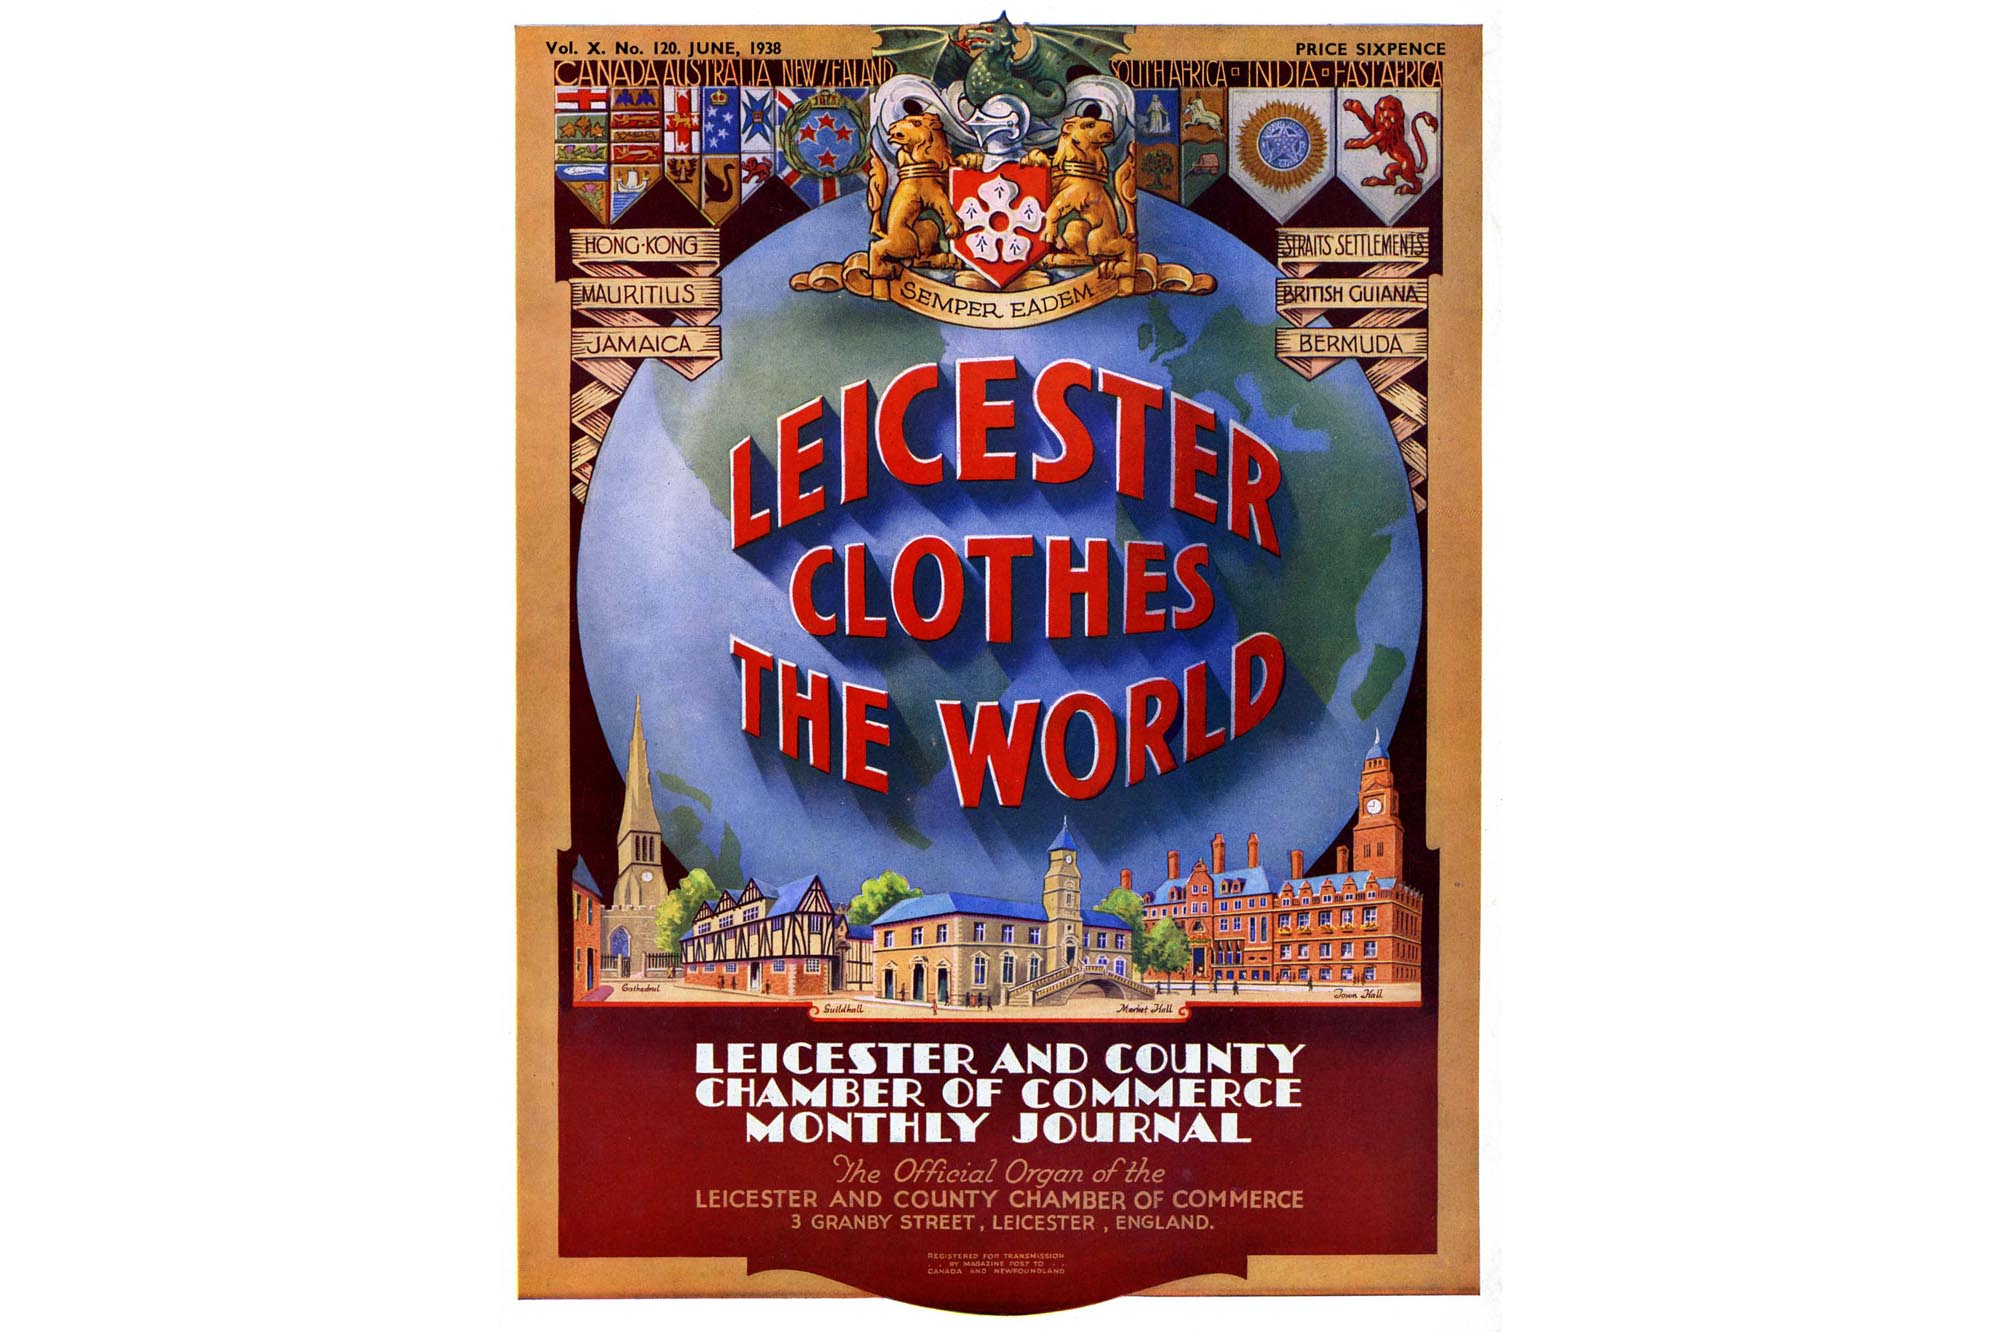 Leicester Clothes the World page view